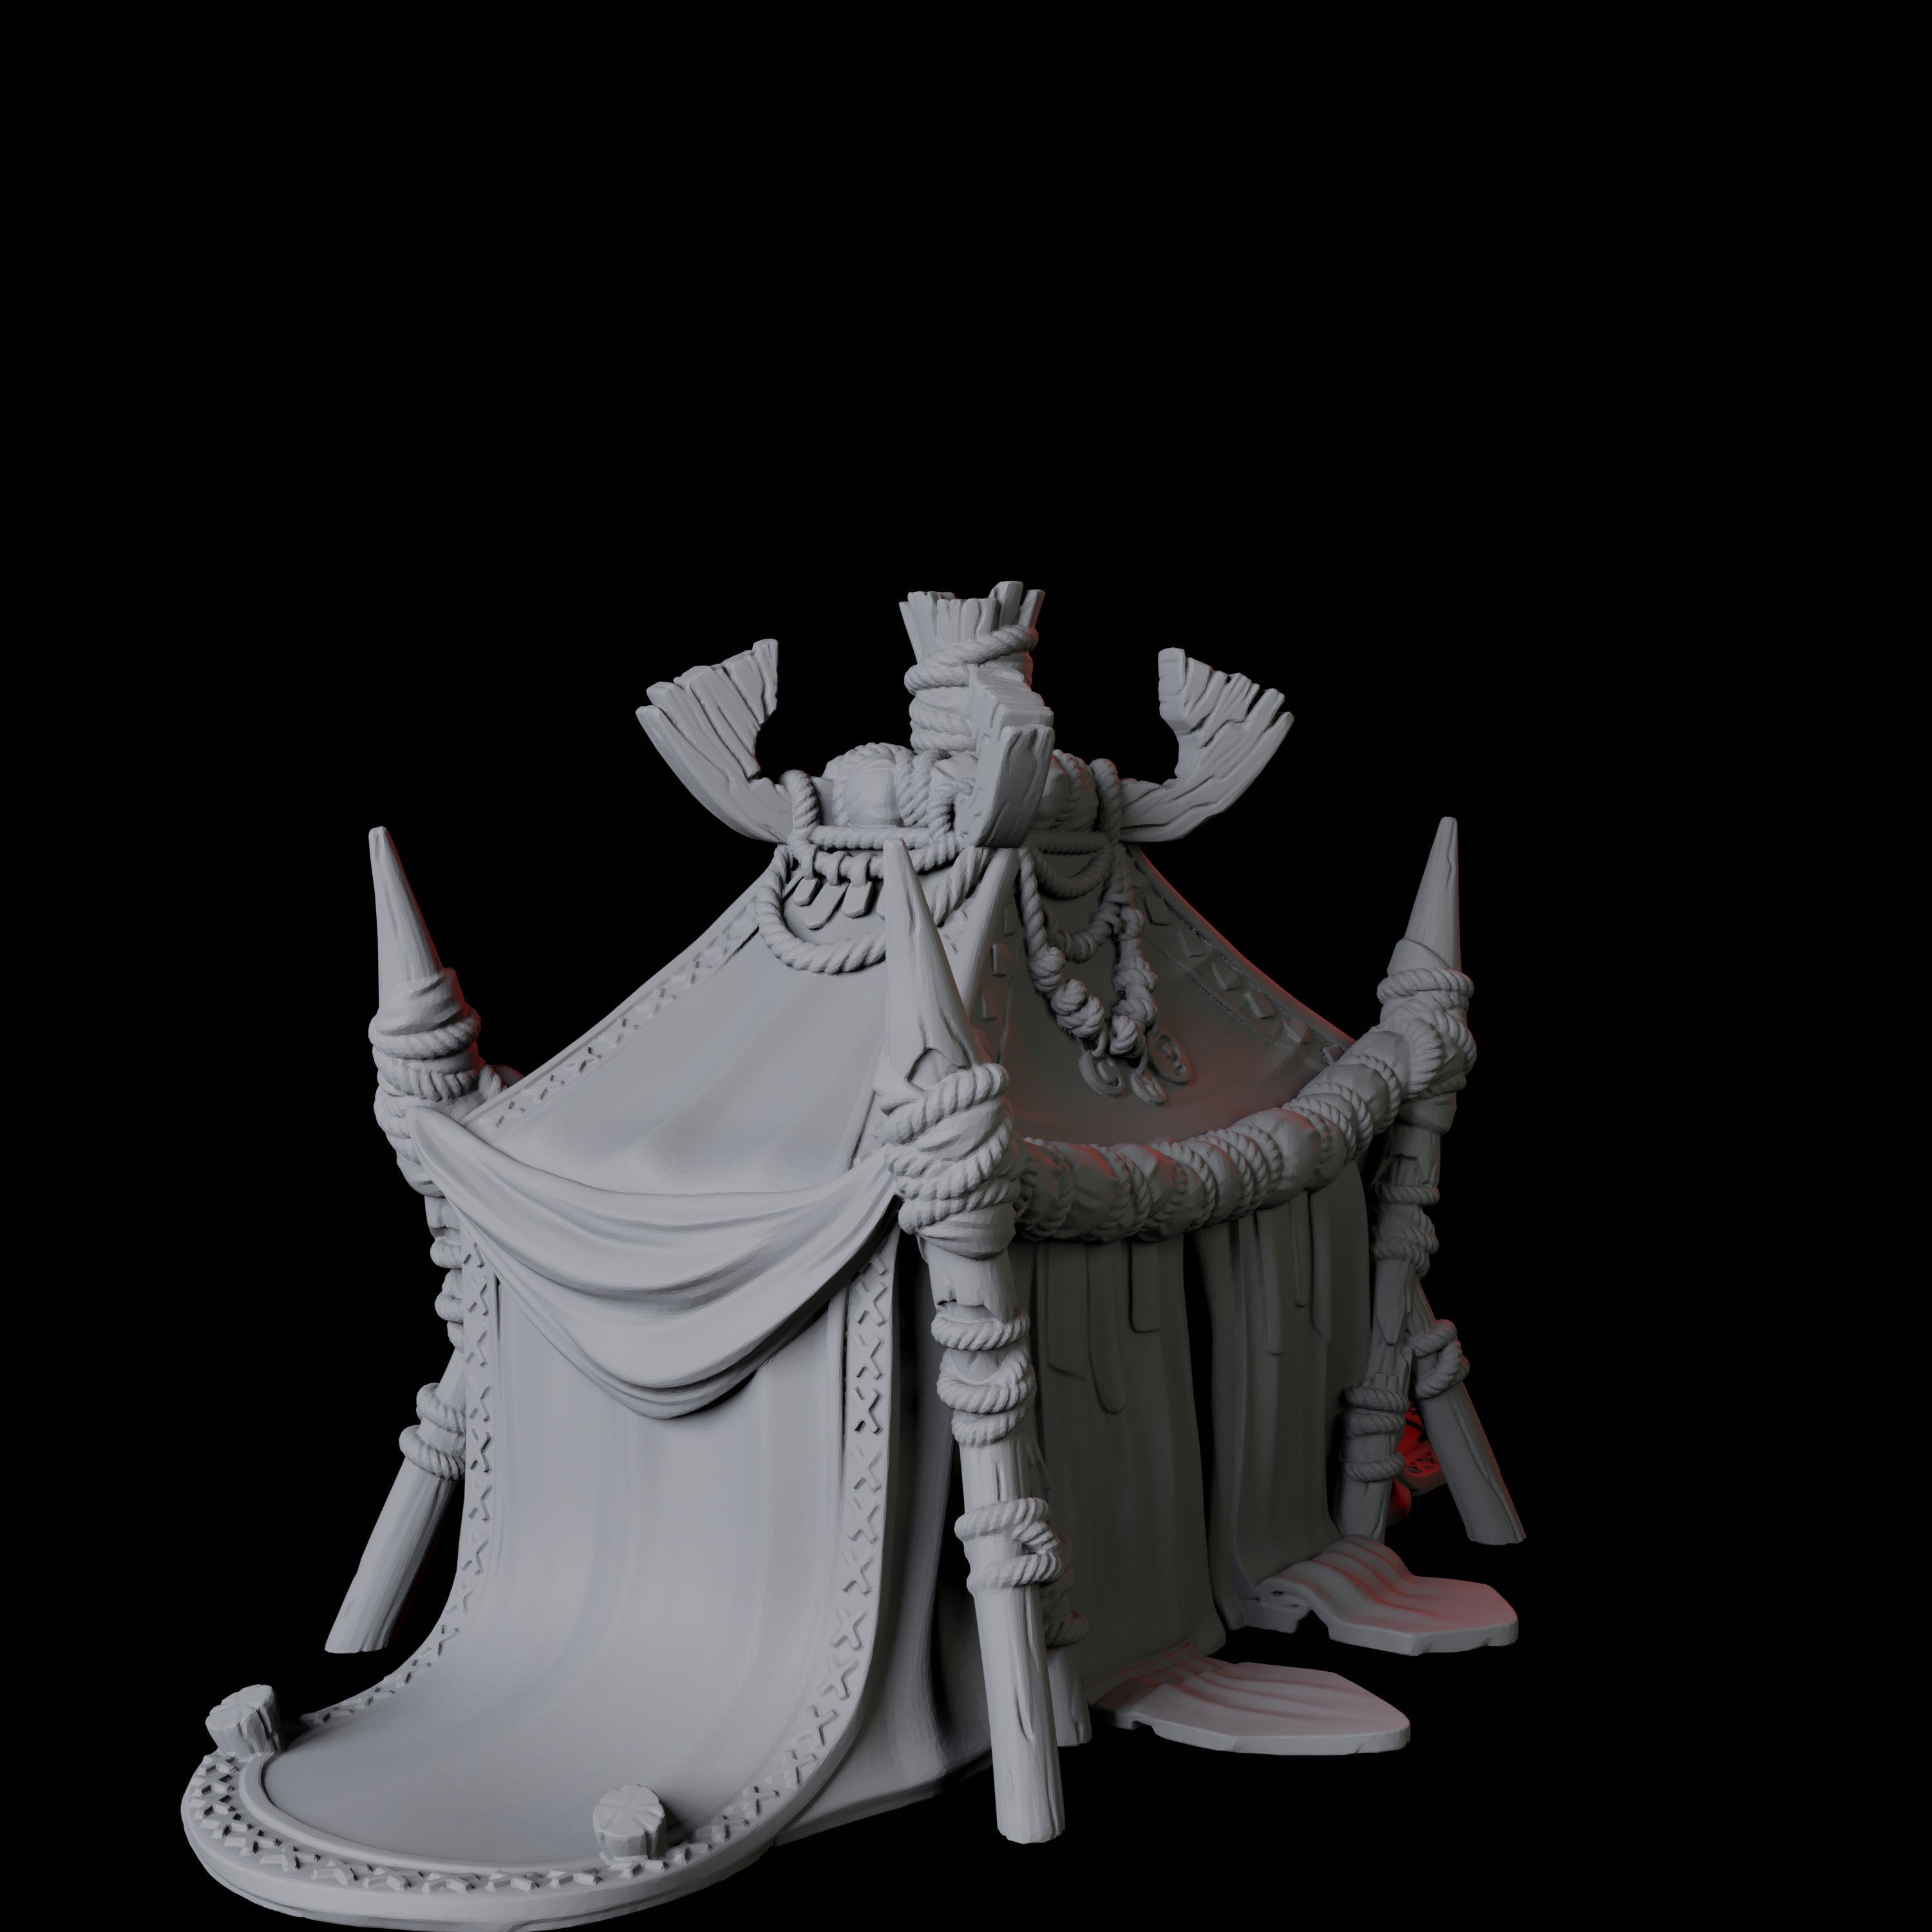 Three Jousting Tents Miniature for Dungeons and Dragons